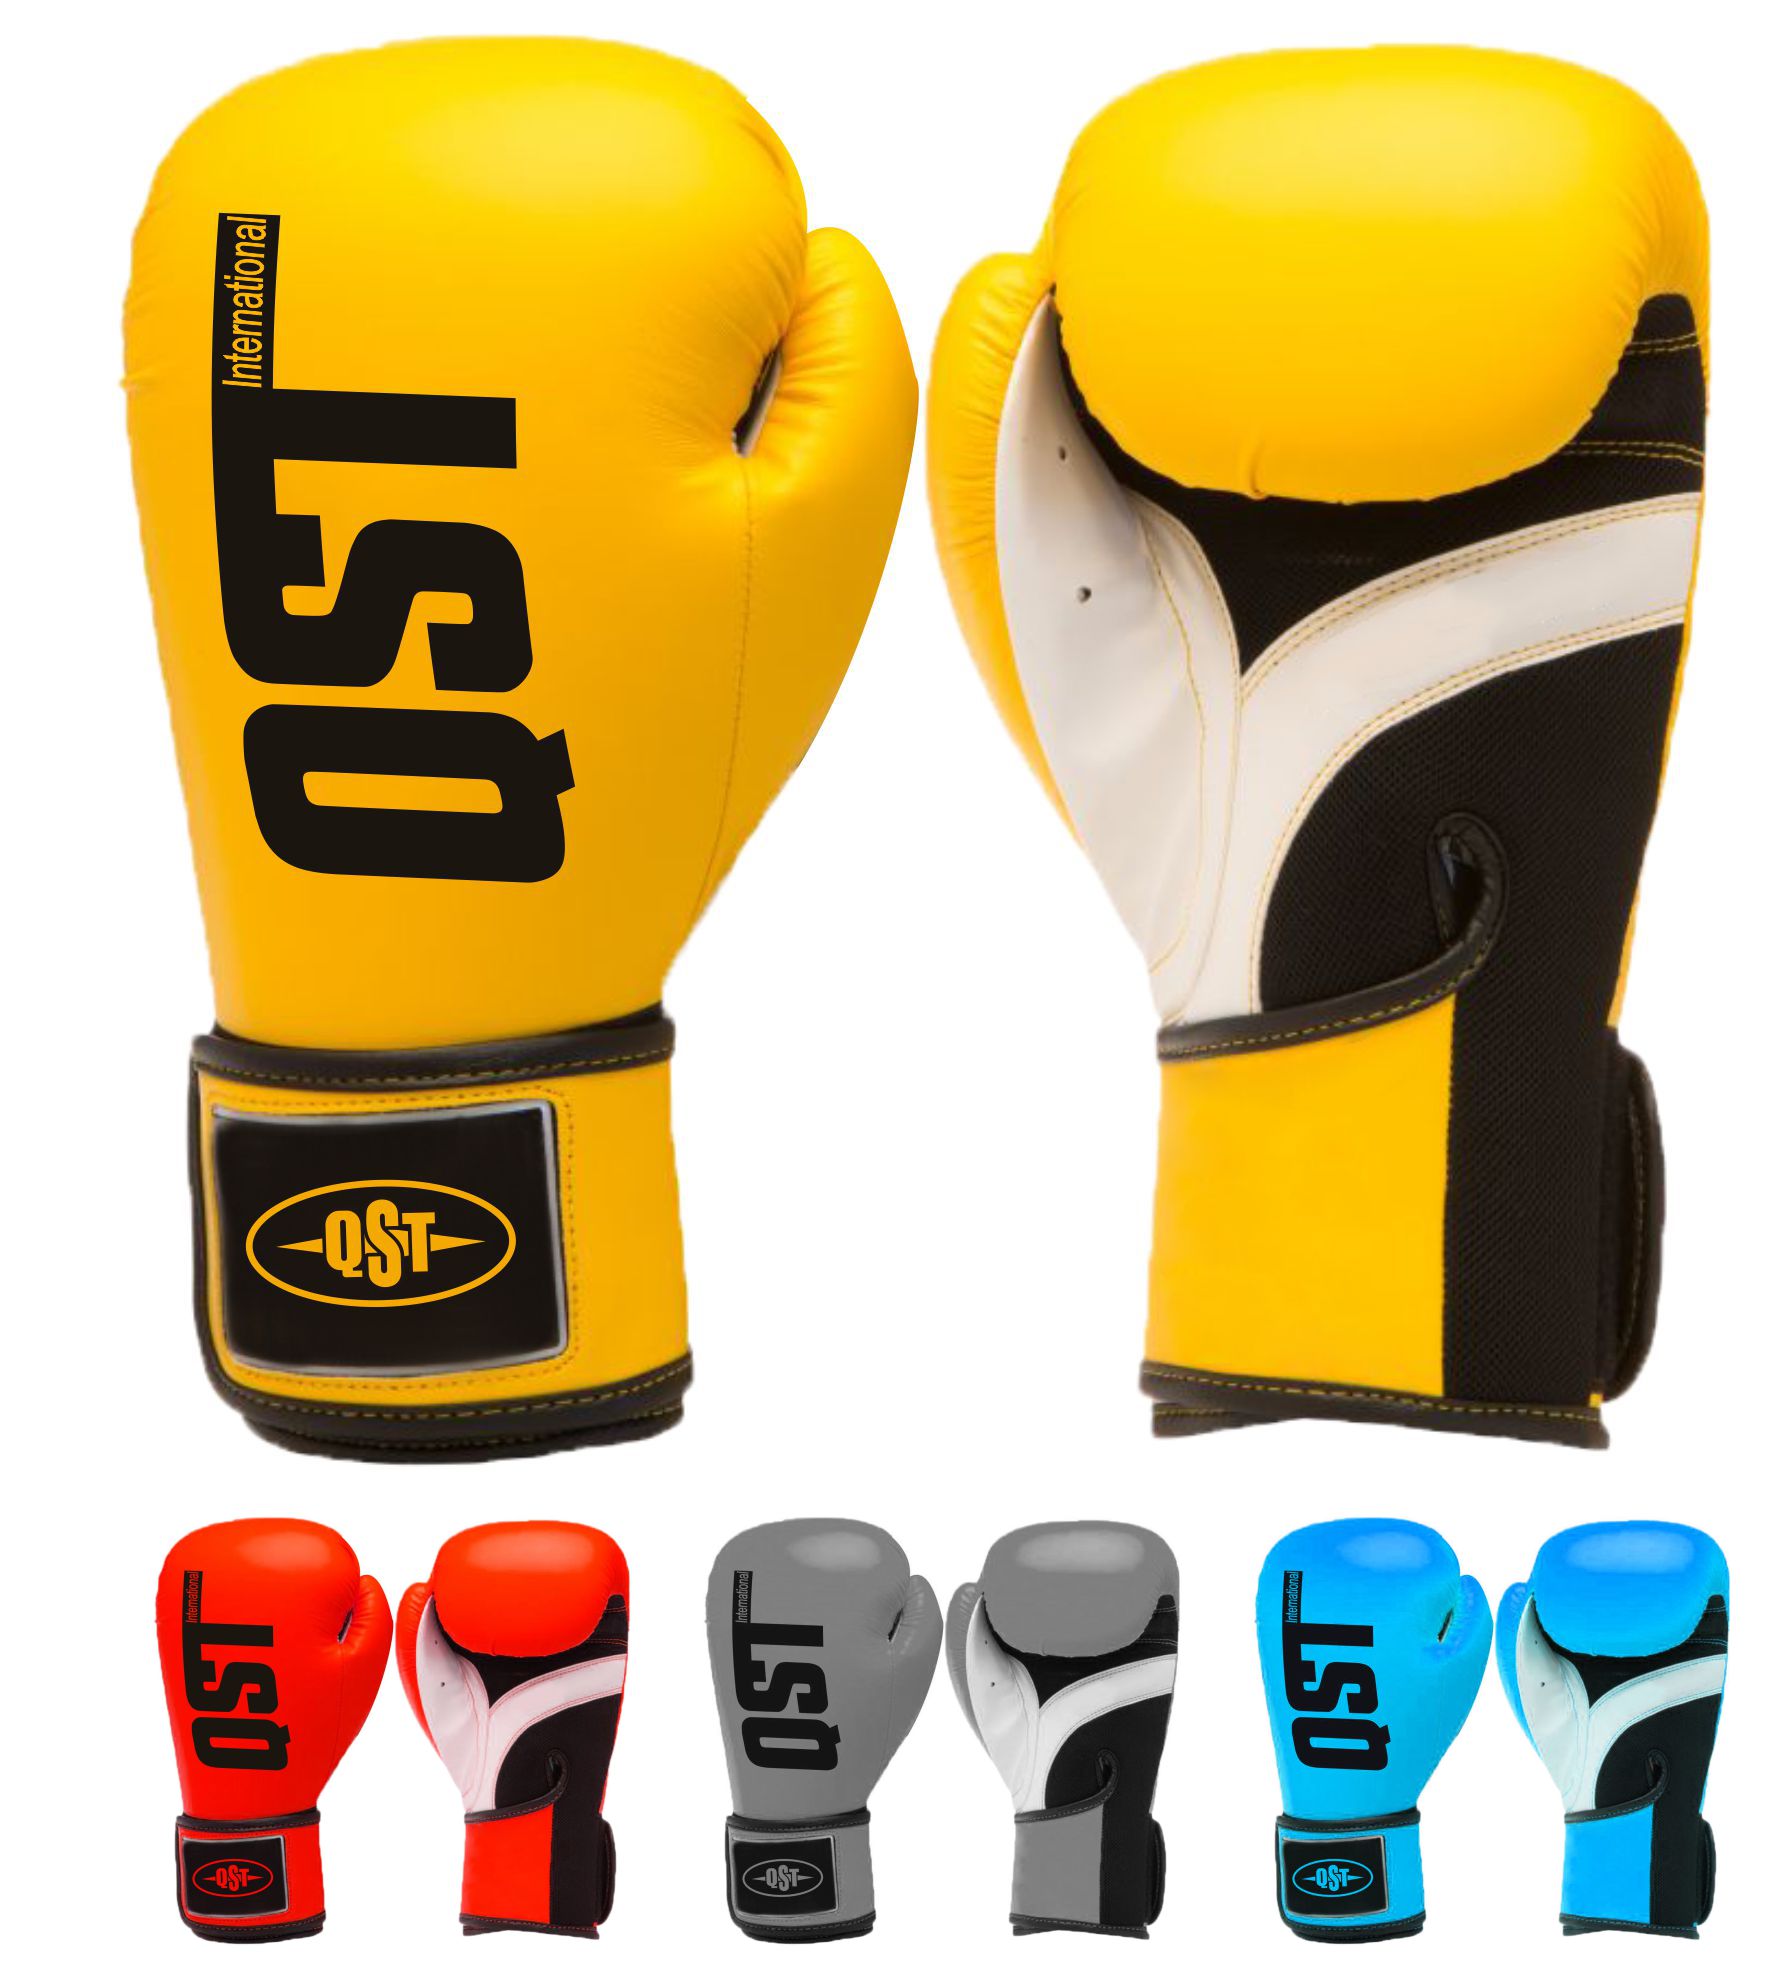 Professional Boxing Gloves - PRG-1501